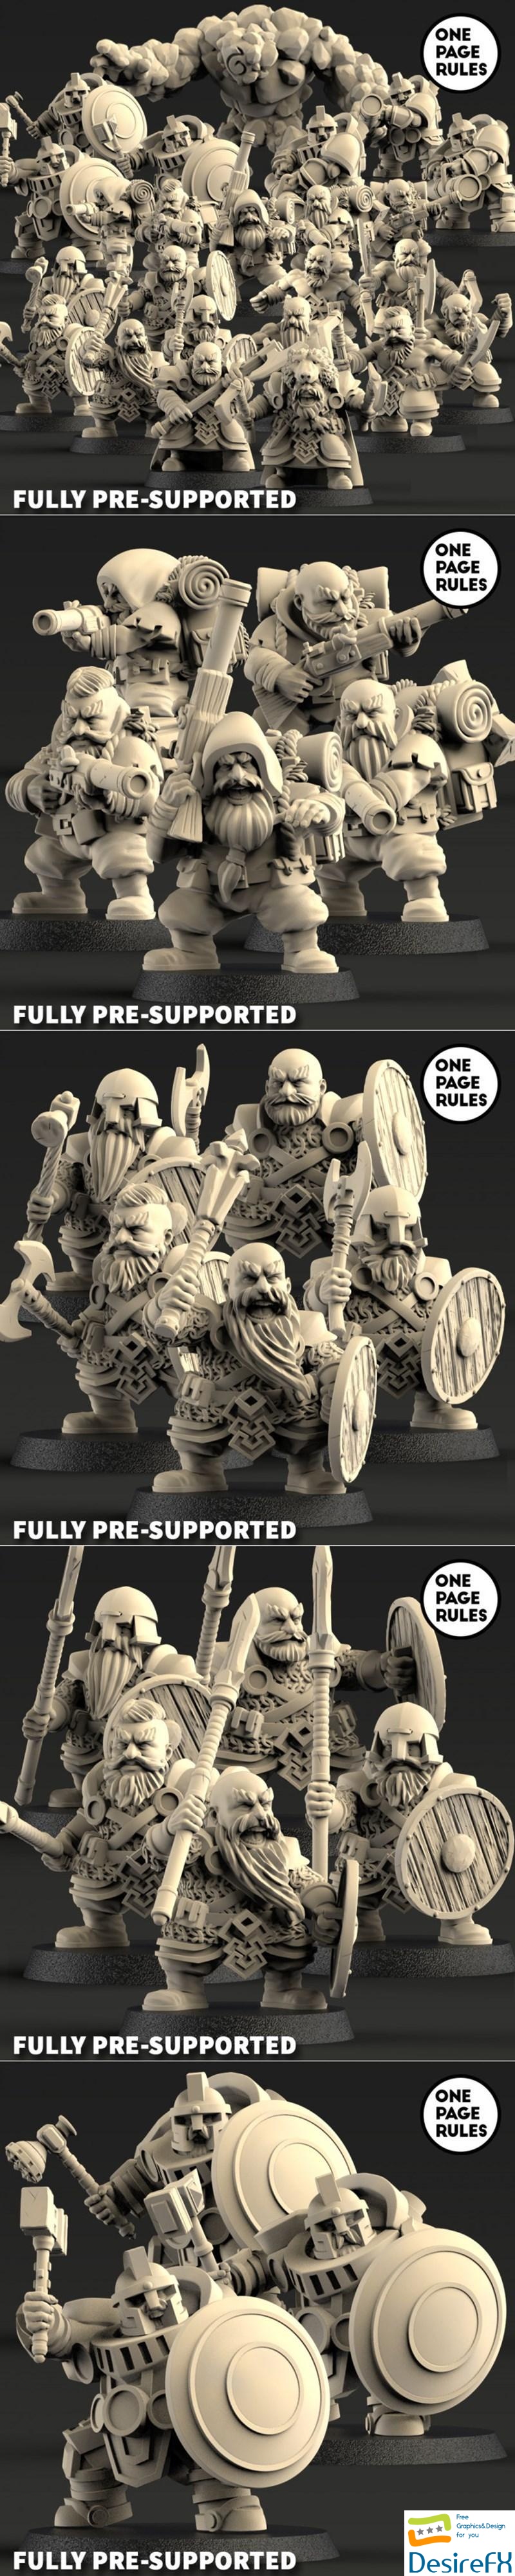 One Page Rules - Dwarf 3D Print